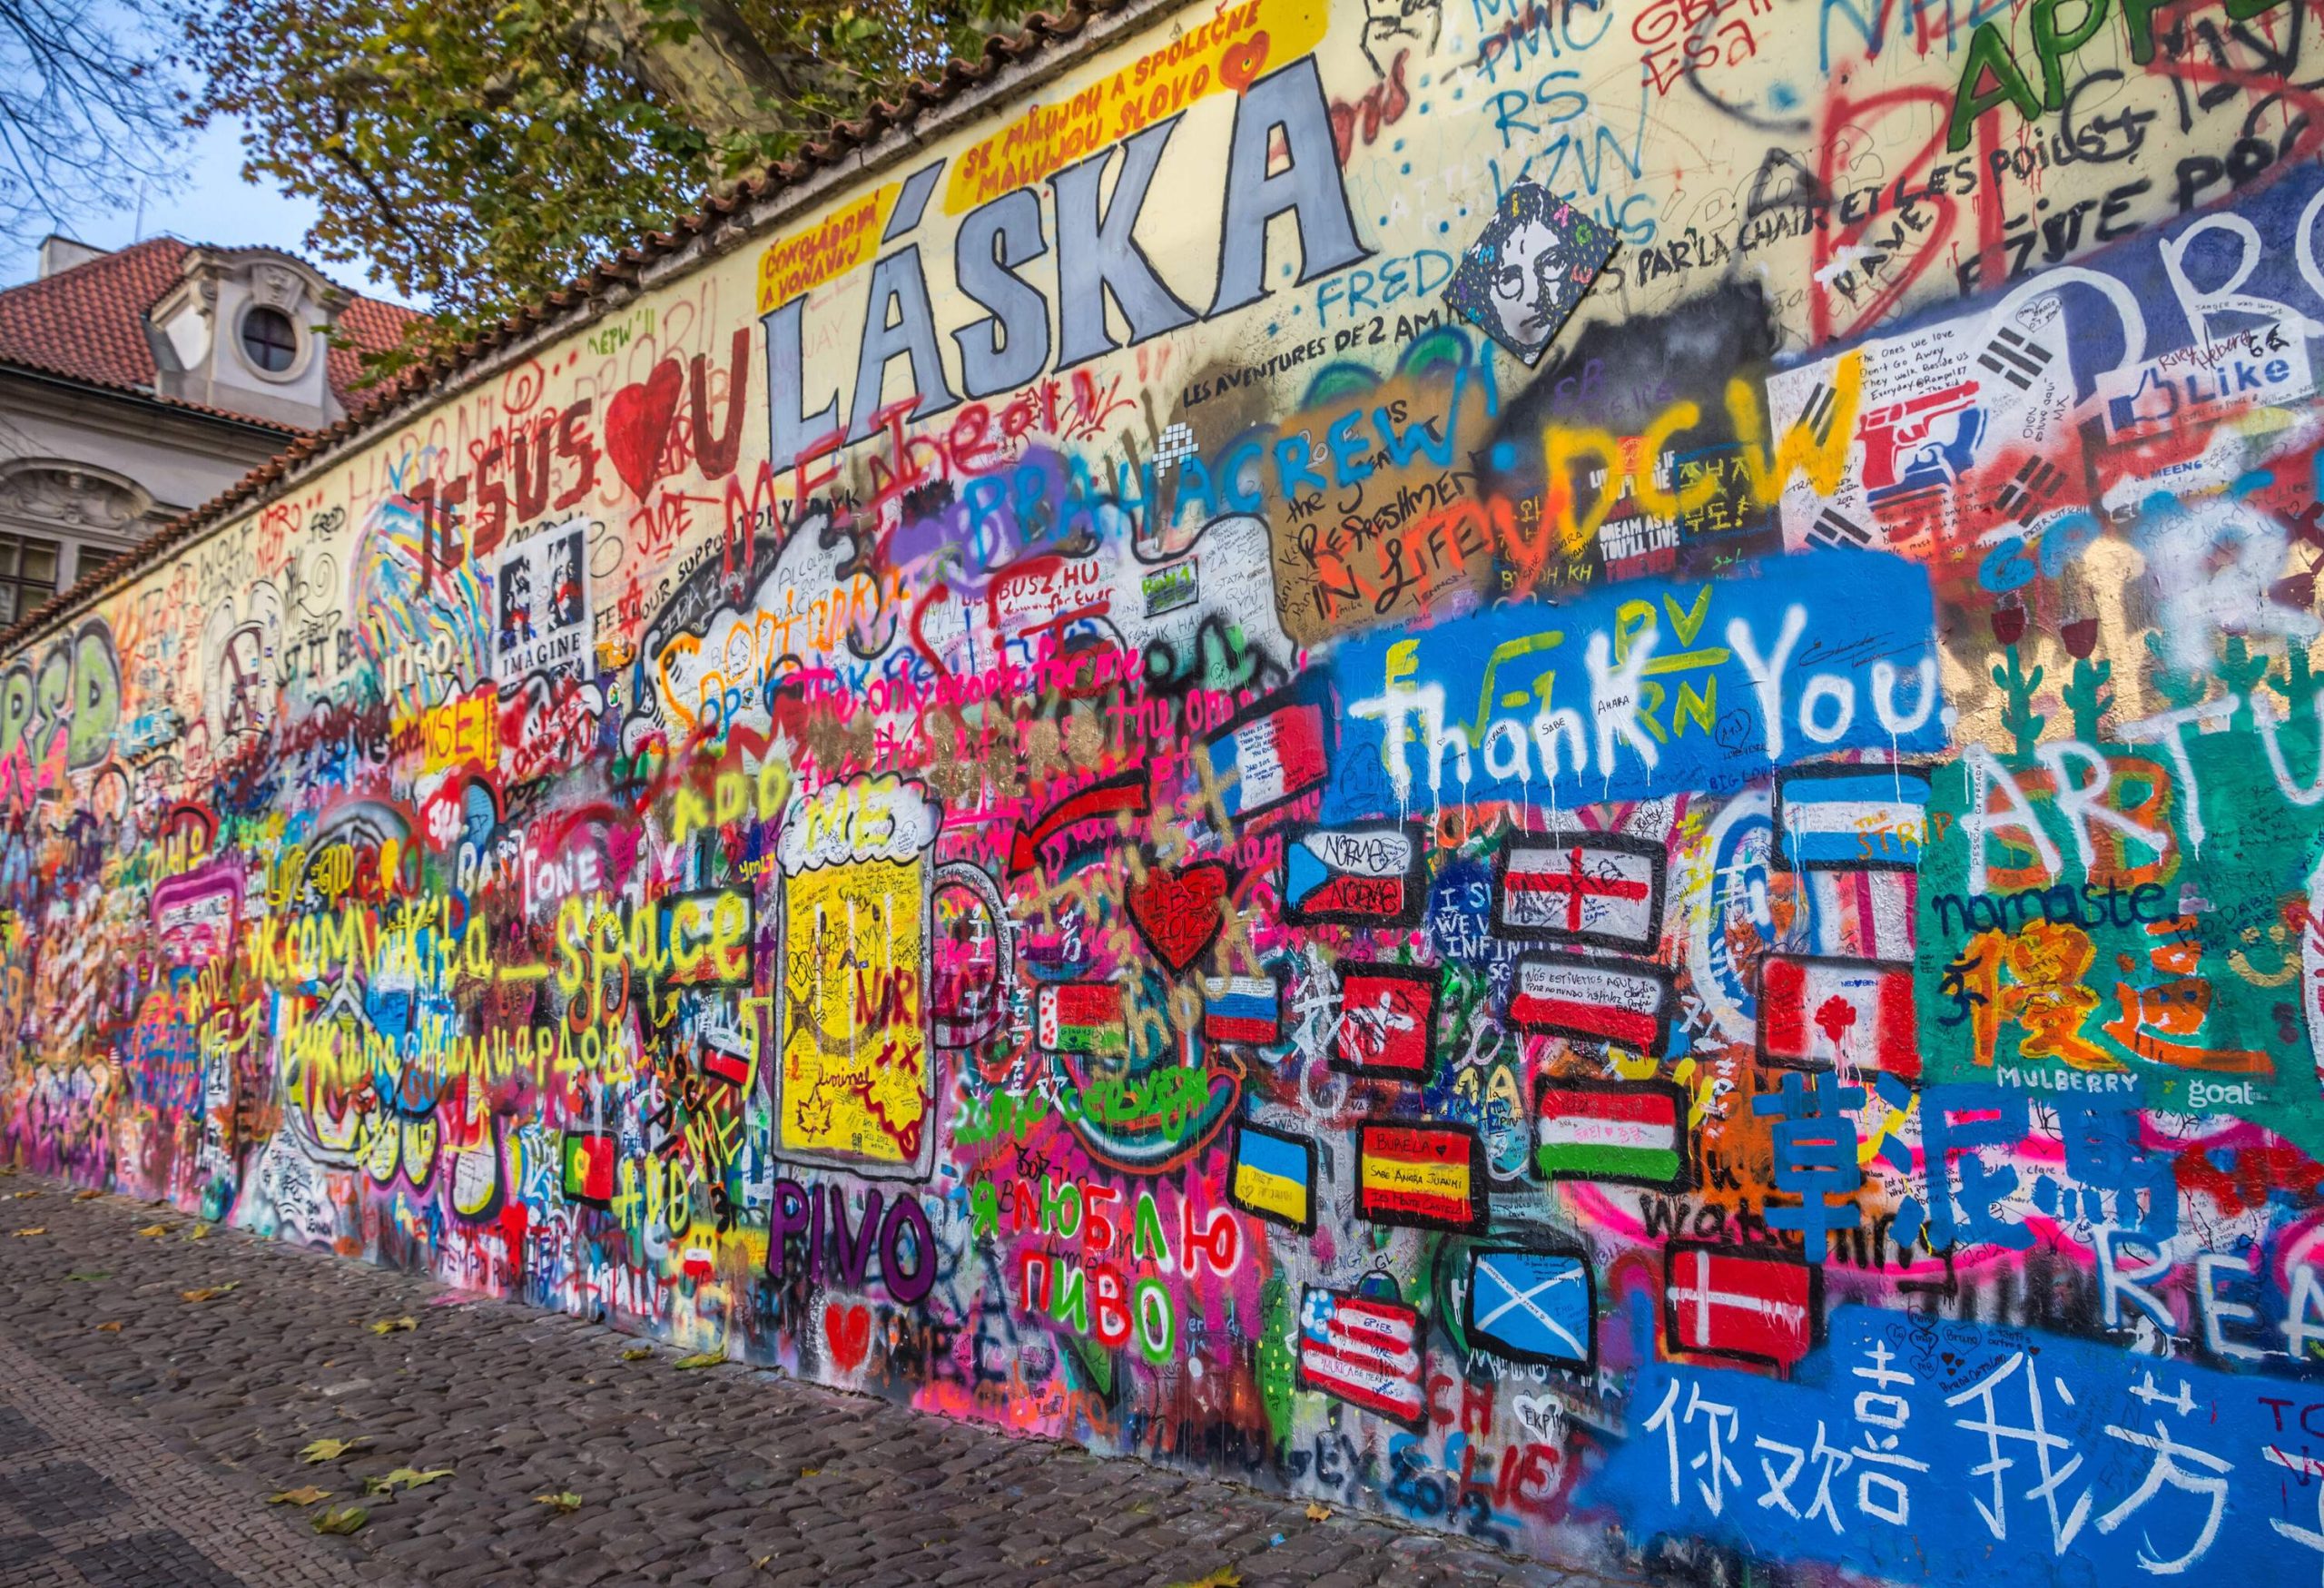 A wall painted with colourful art and graffiti.